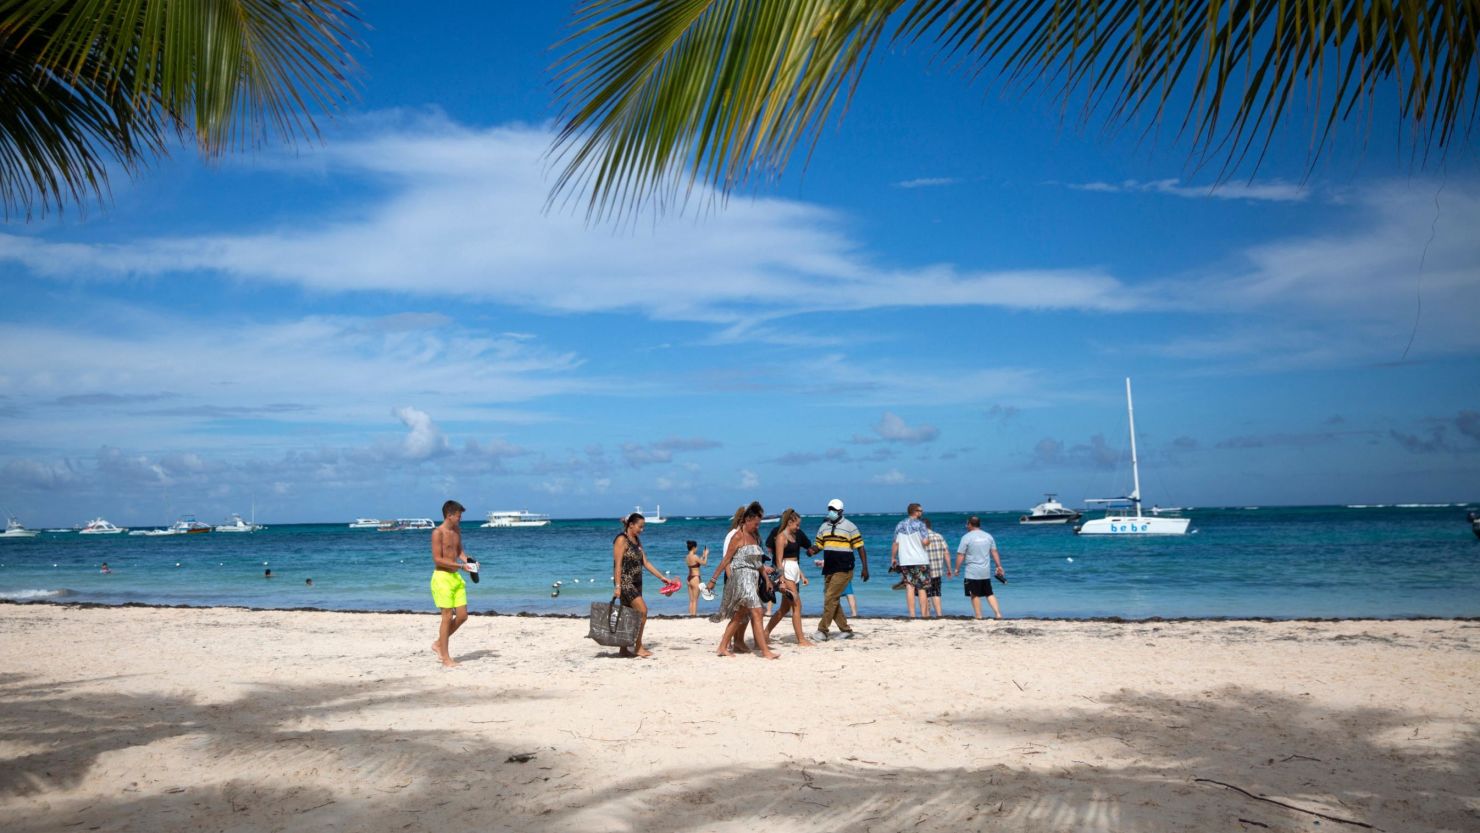 Tourists enjoy a beach in Punta Cana in the Dominican Republic, on January 7, 2022. - Almost 5 million tourists visited Dominican Republic in 2021, compared to the 6.4 million reported in 2019 before the pandemic started. With a significant growth in tourism and at the same time of infections by Covid-19, hotels in the Dominican Republic allocate areas to isolate tourists sick with the virus. (Photo by Erika SANTELICES / AFP) (Photo by ERIKA SANTELICES/afp/AFP via Getty Images)